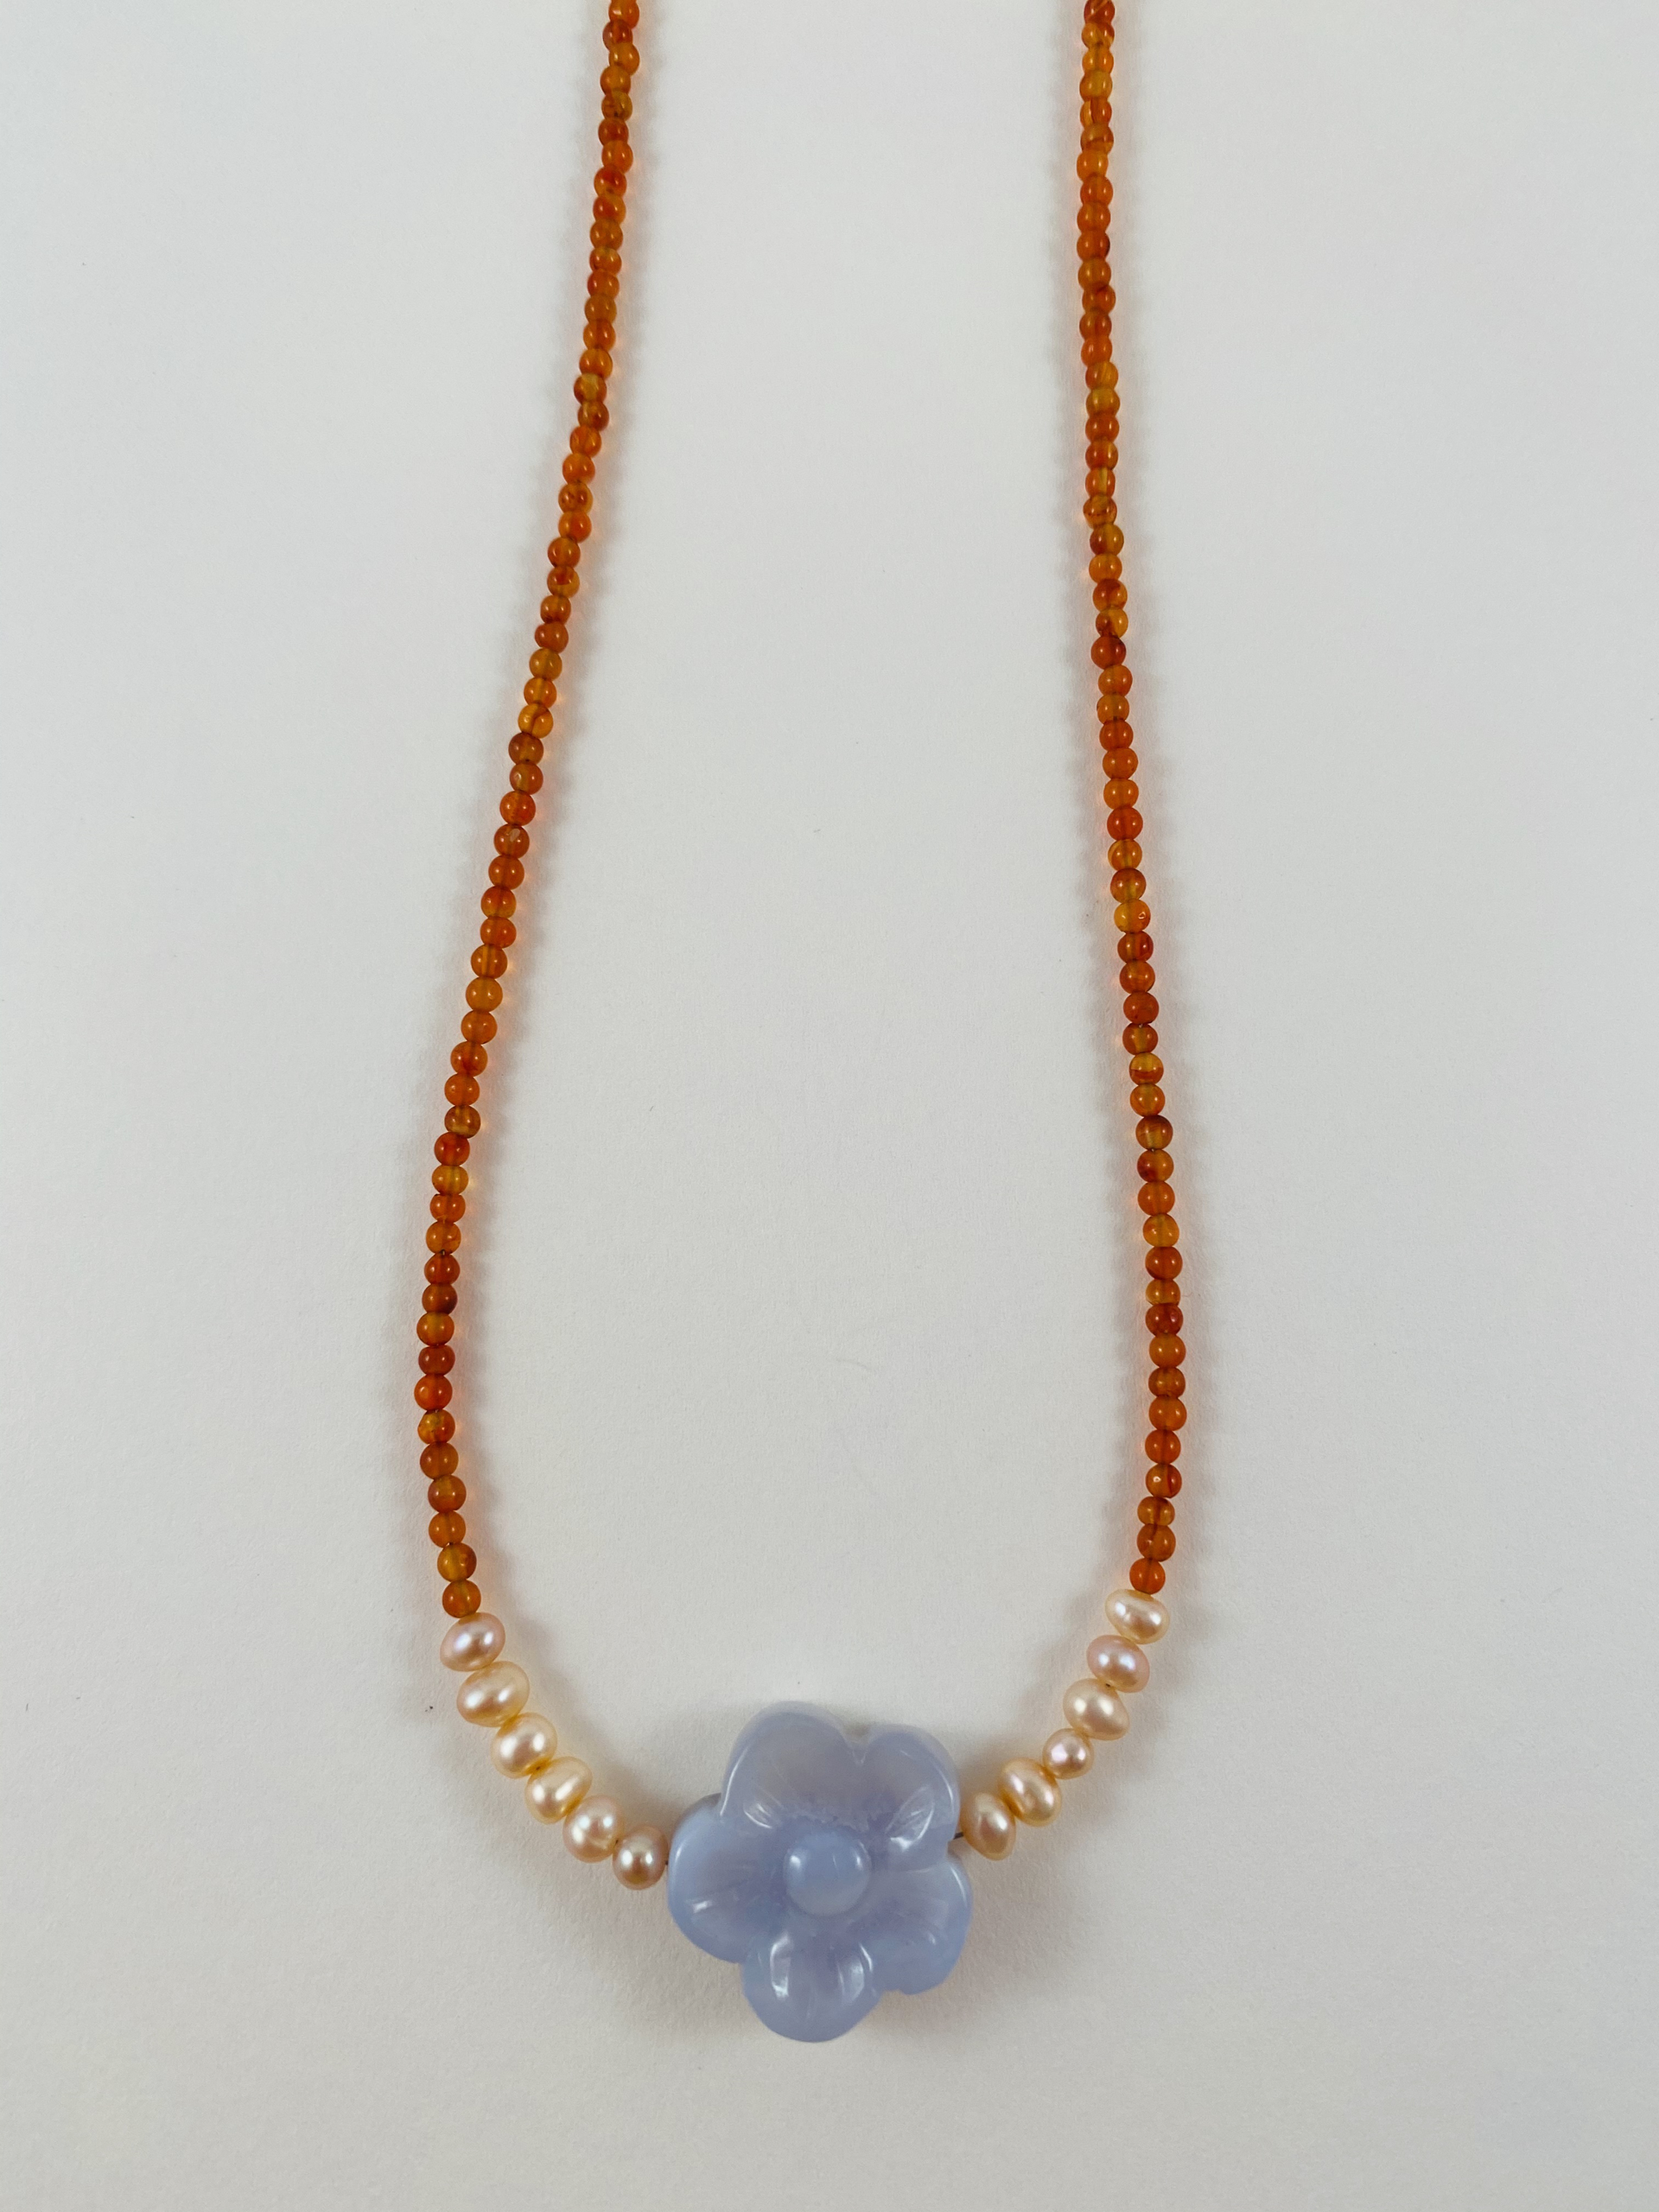 Tine Carnelian and Pearl Necklace, carved blue chalcedony pendant by Nance Trueworthy